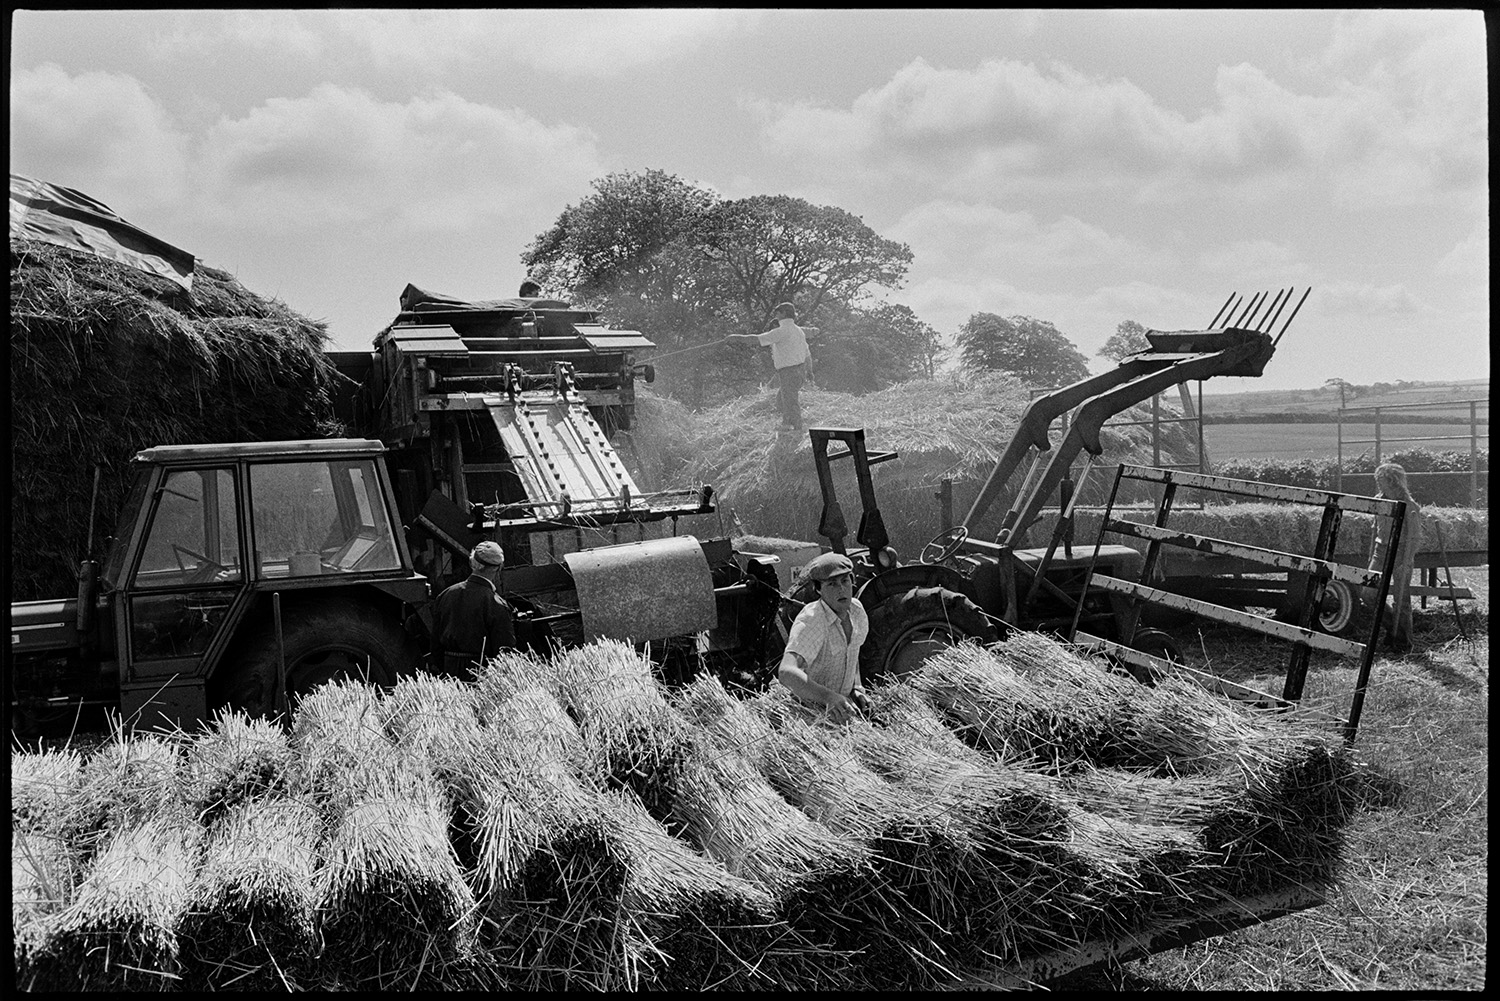 Reedcombing machine, nitches of reed, men working in sunlight. 
[Stephen Middleton and other men reedcombing in a field at Westacott, Riddlecombe. A man is dismantling the rick and loading the reed into the reed comber, using a pitchfork. Two more men are at the bottom of the reed comber receiving the nitches of reed and loading them onto a trailer.]